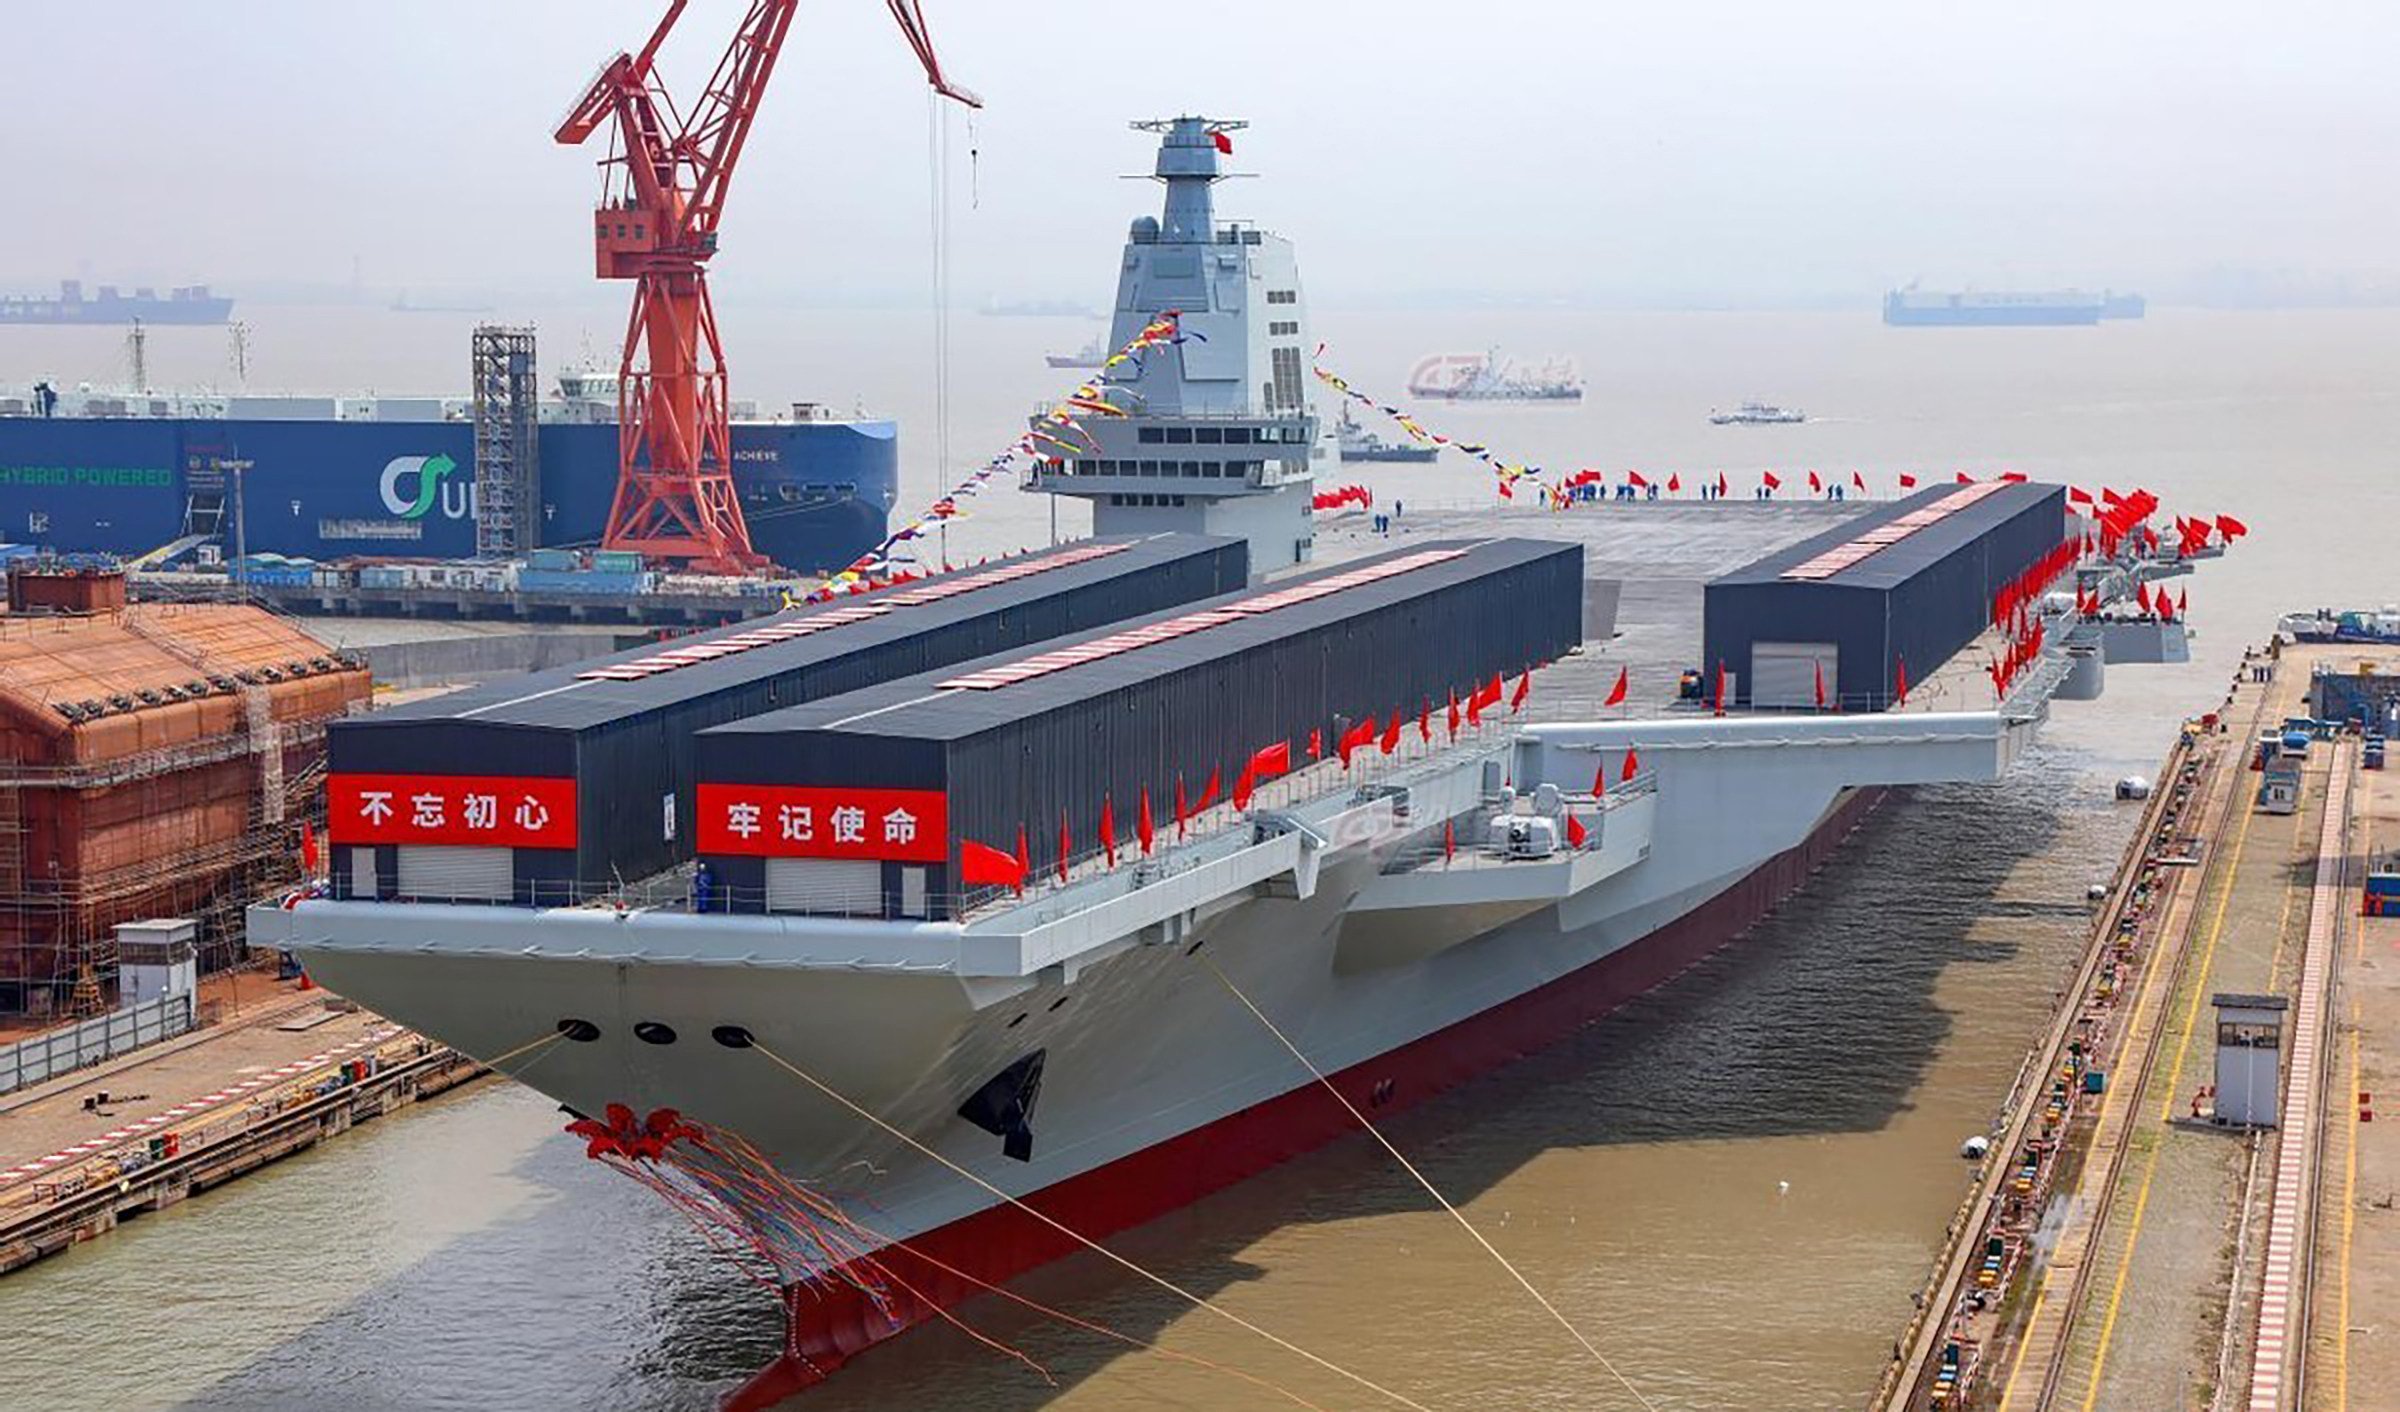 China’s third aircraft carrier, the Fujian, is China’s biggest and most complex warship yet and marks a milestone in Xi’s project to modernise the PLA. Photo: Weibo